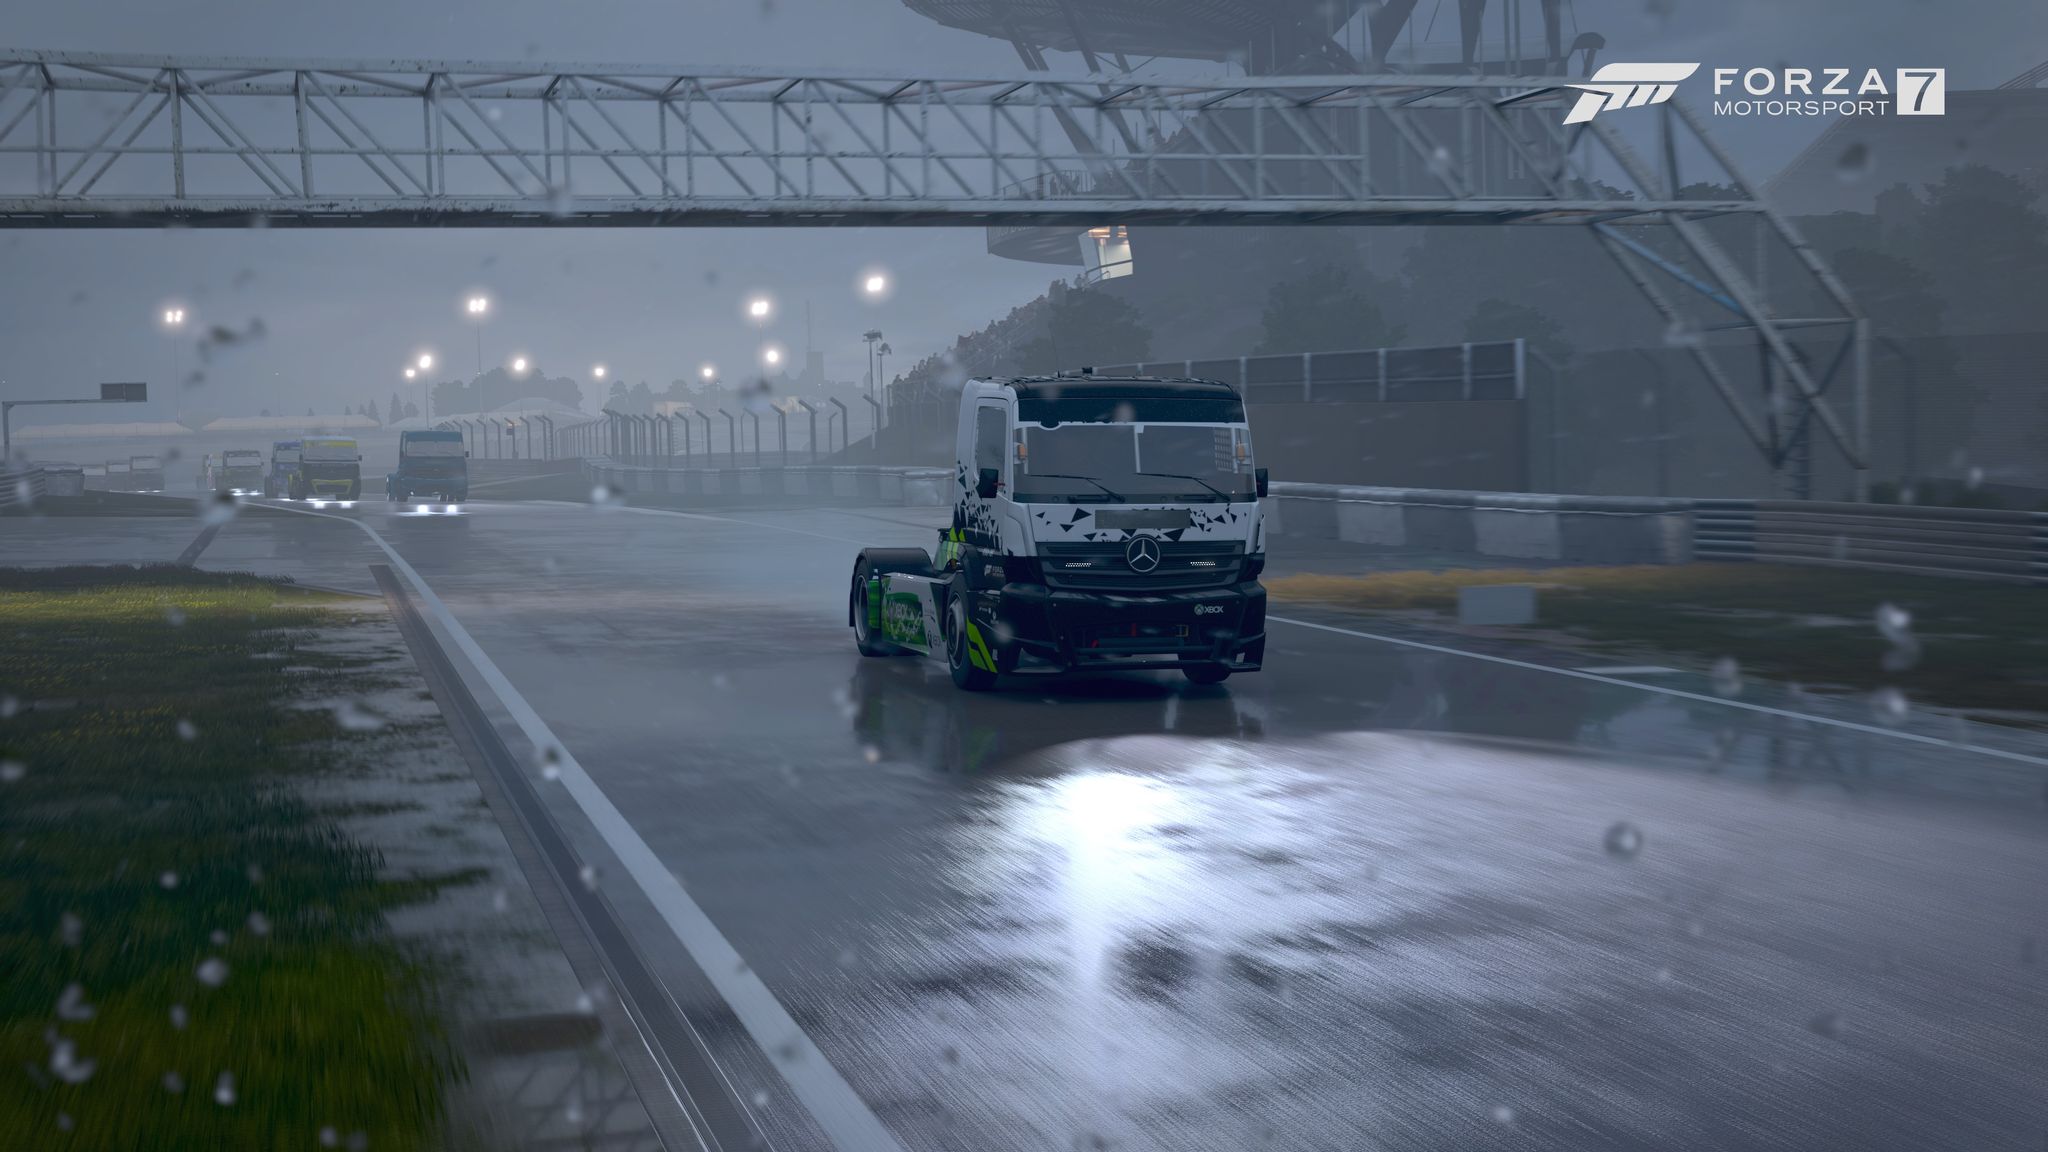 A screenshot from Forza Motorsport 7 showing a truck cab racing along a rainy stretch of road with its headlights on, water spraying up behind it, and rain drops on the camera lens.